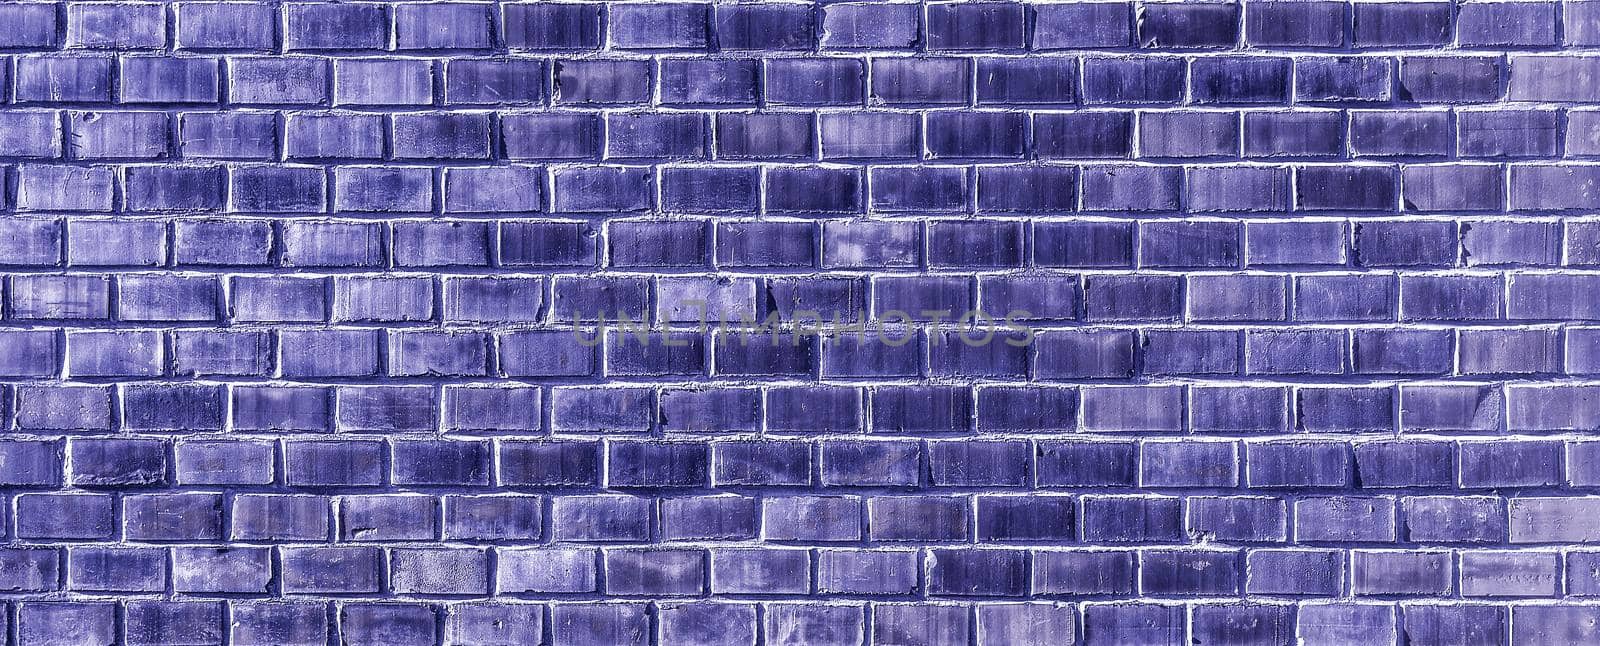 Navy blue Brick wall texture close up. Top view. Modern brick wall wallpaper design for web or graphic art projects. Abstract background for business cards and covers. Template or mock up.